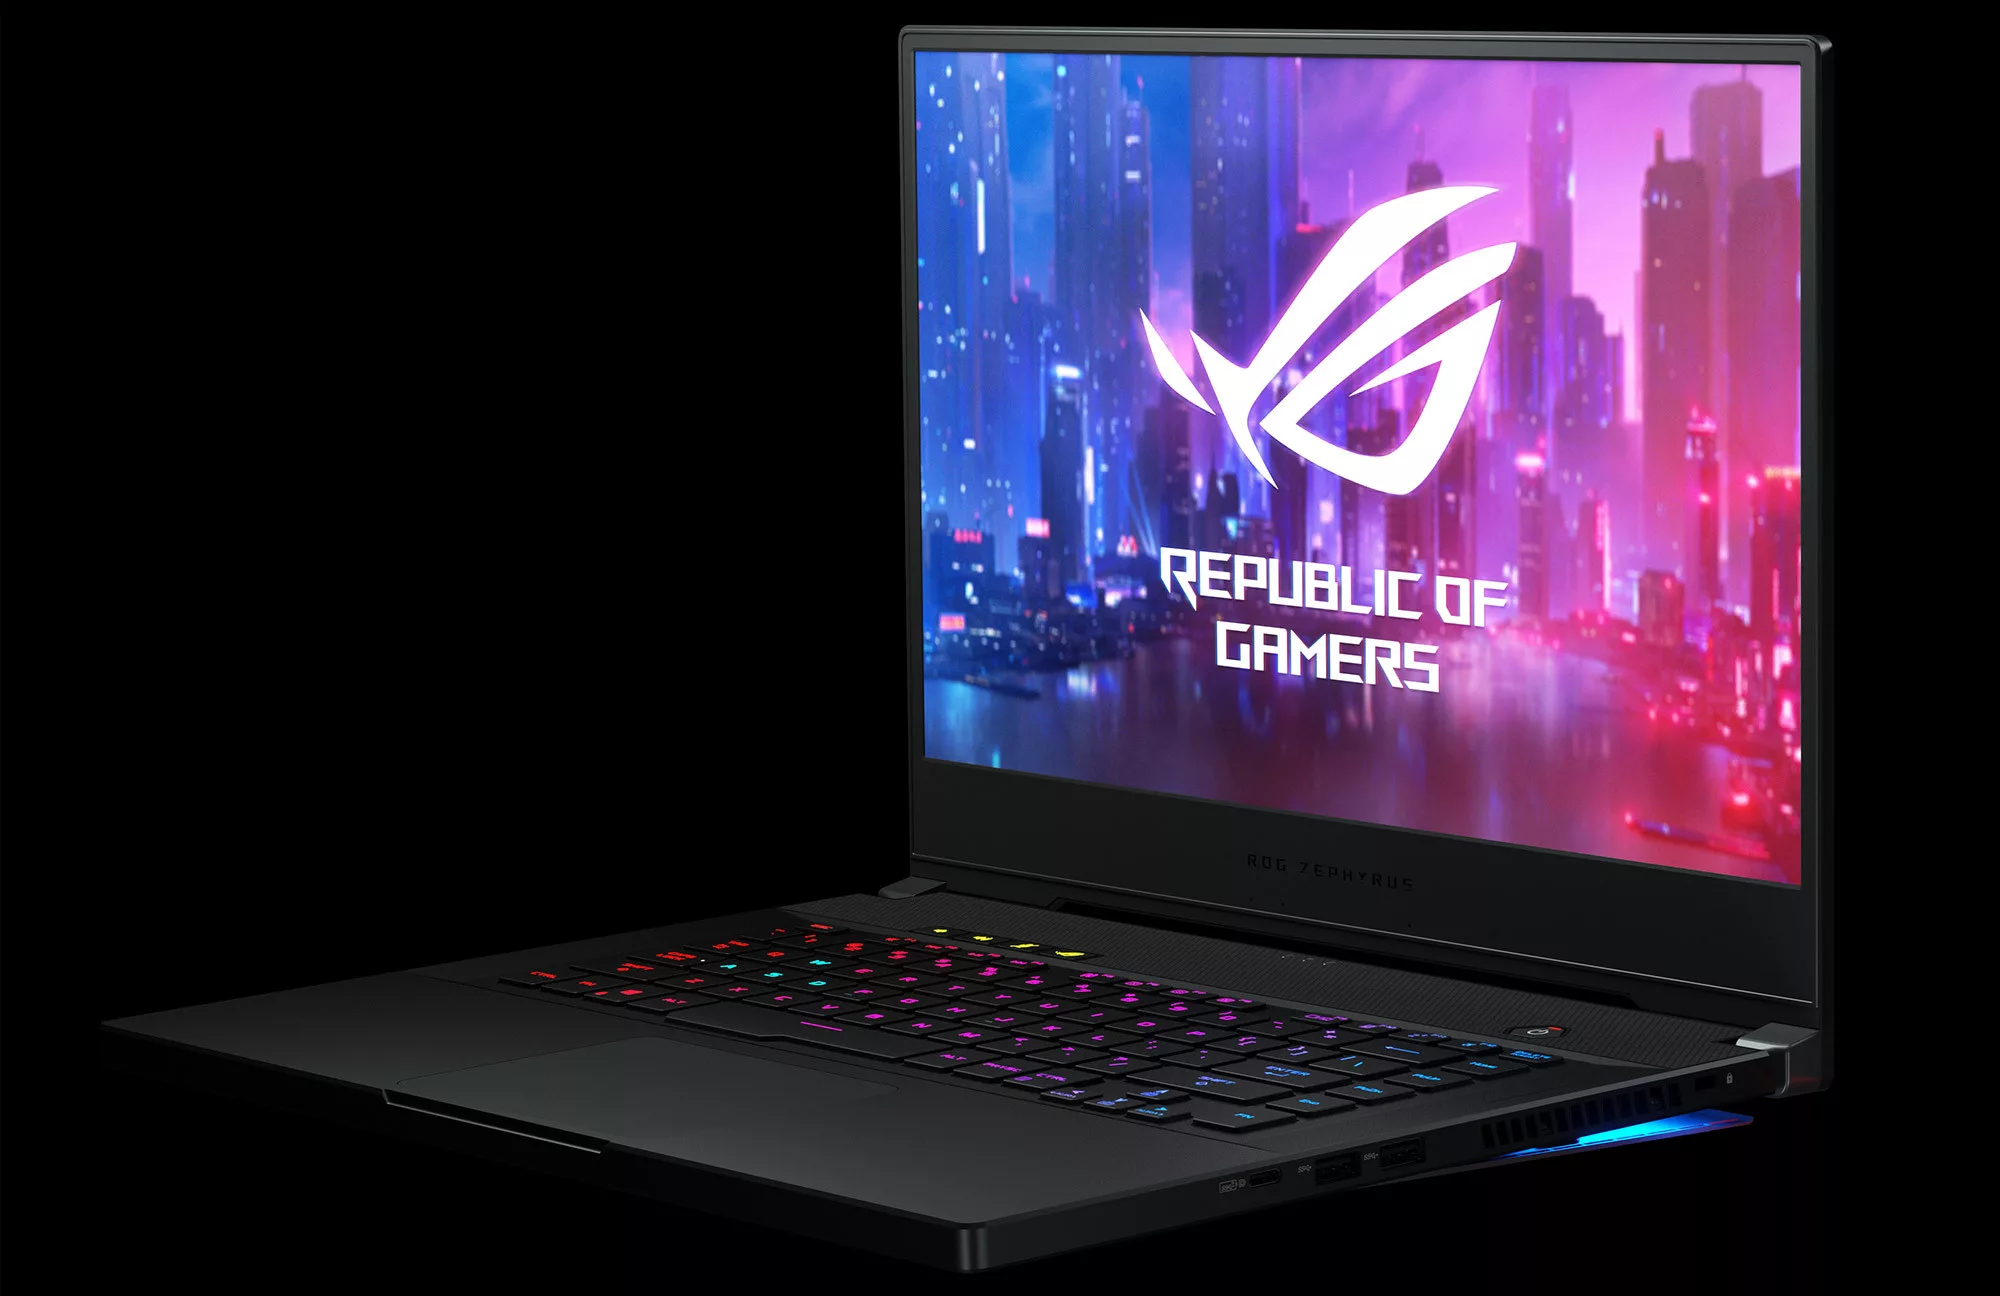 The ROG Zephyrus S GX502 brings professional ambition to ultra 